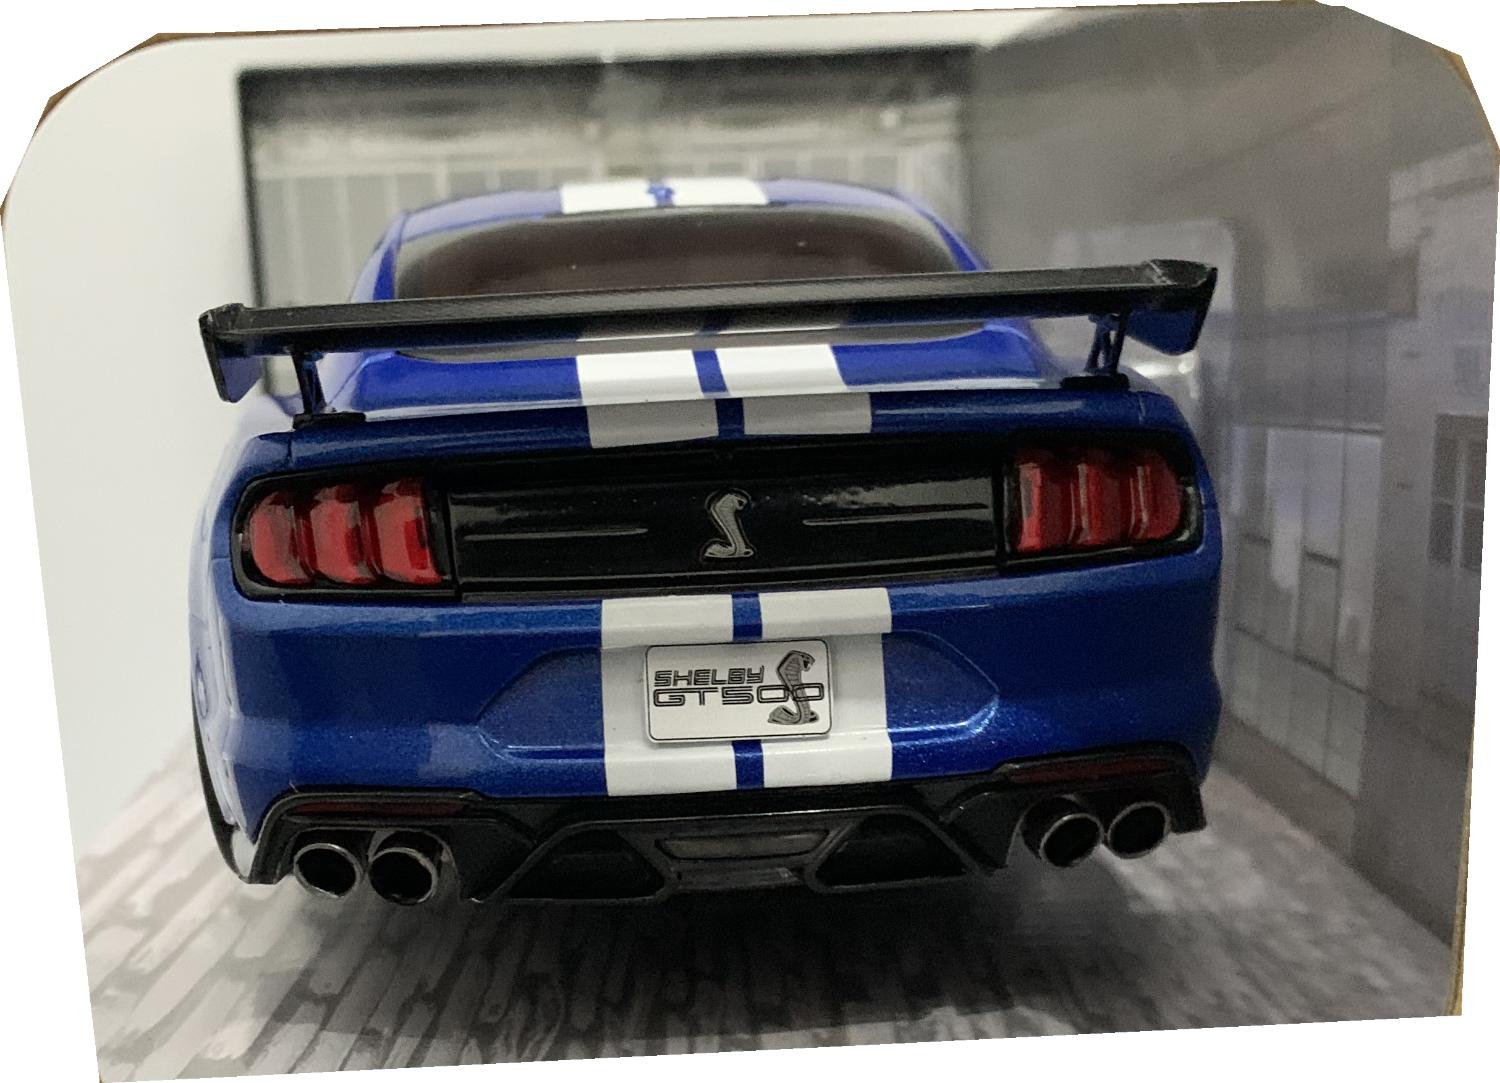 A very good representation of the Ford Mustang Shelby GT500 Fast Track